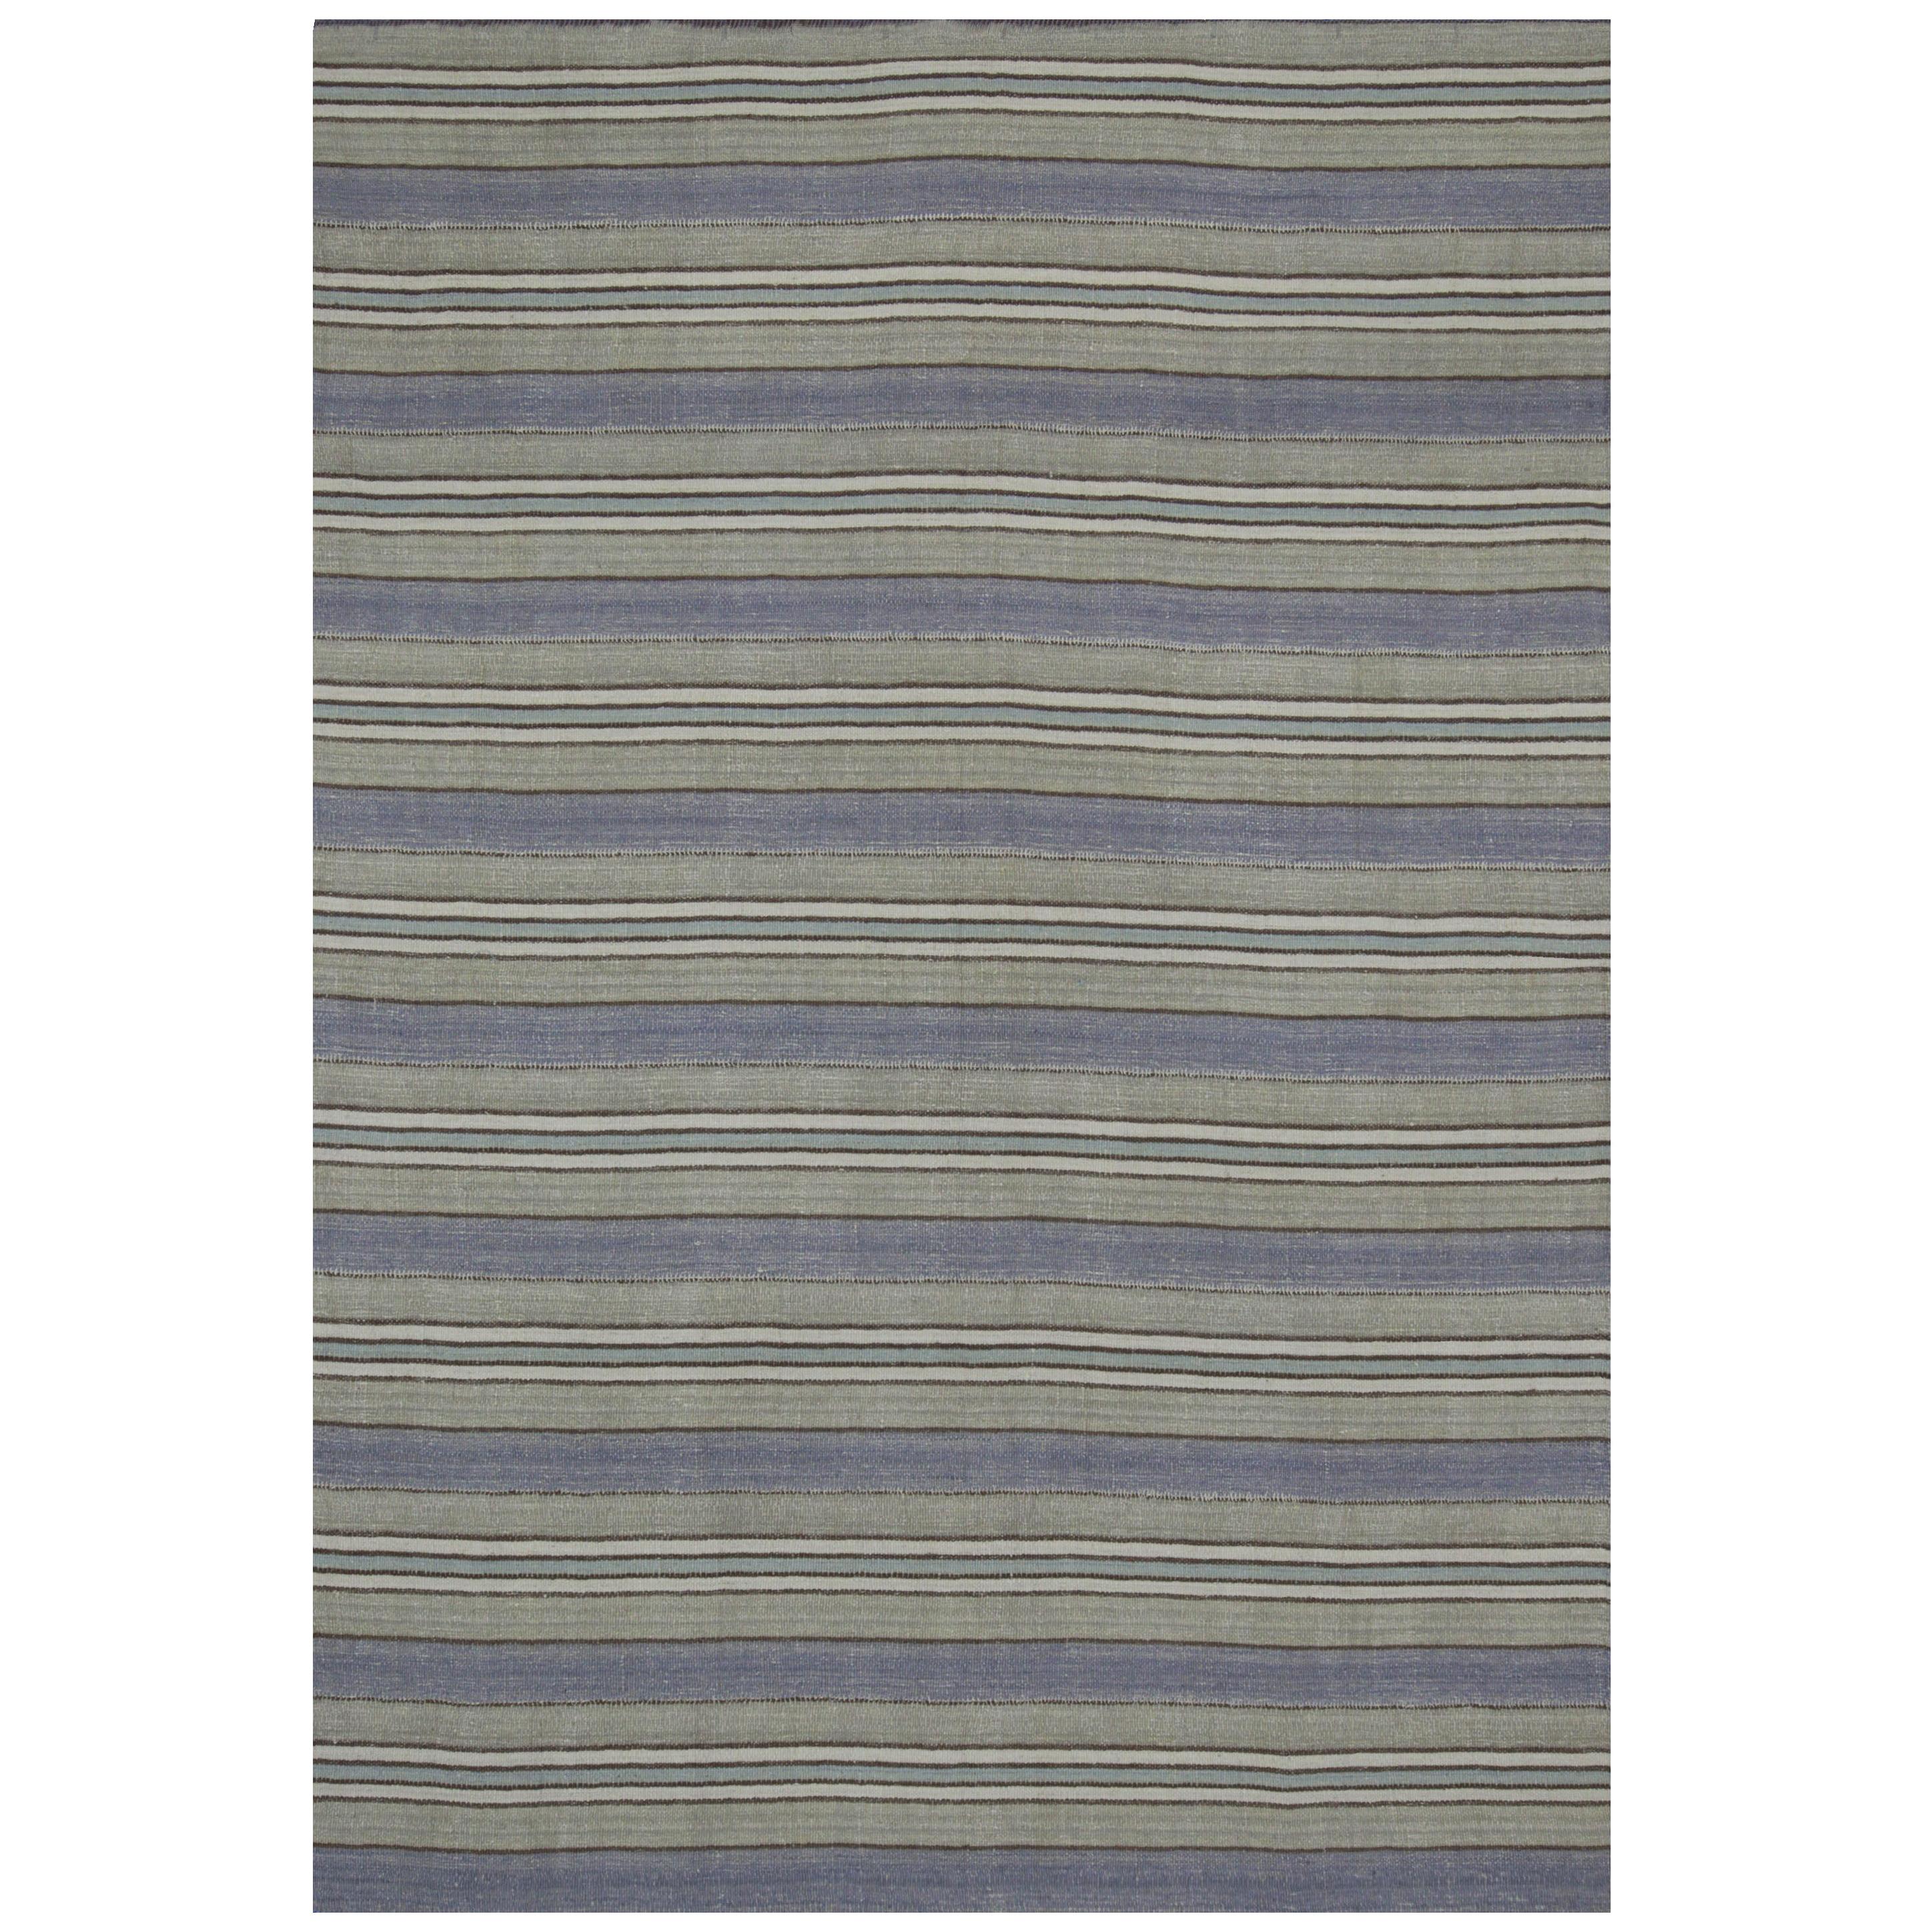 Contemporary Kilim Rug from Turkey with Blue and Gray Stripes